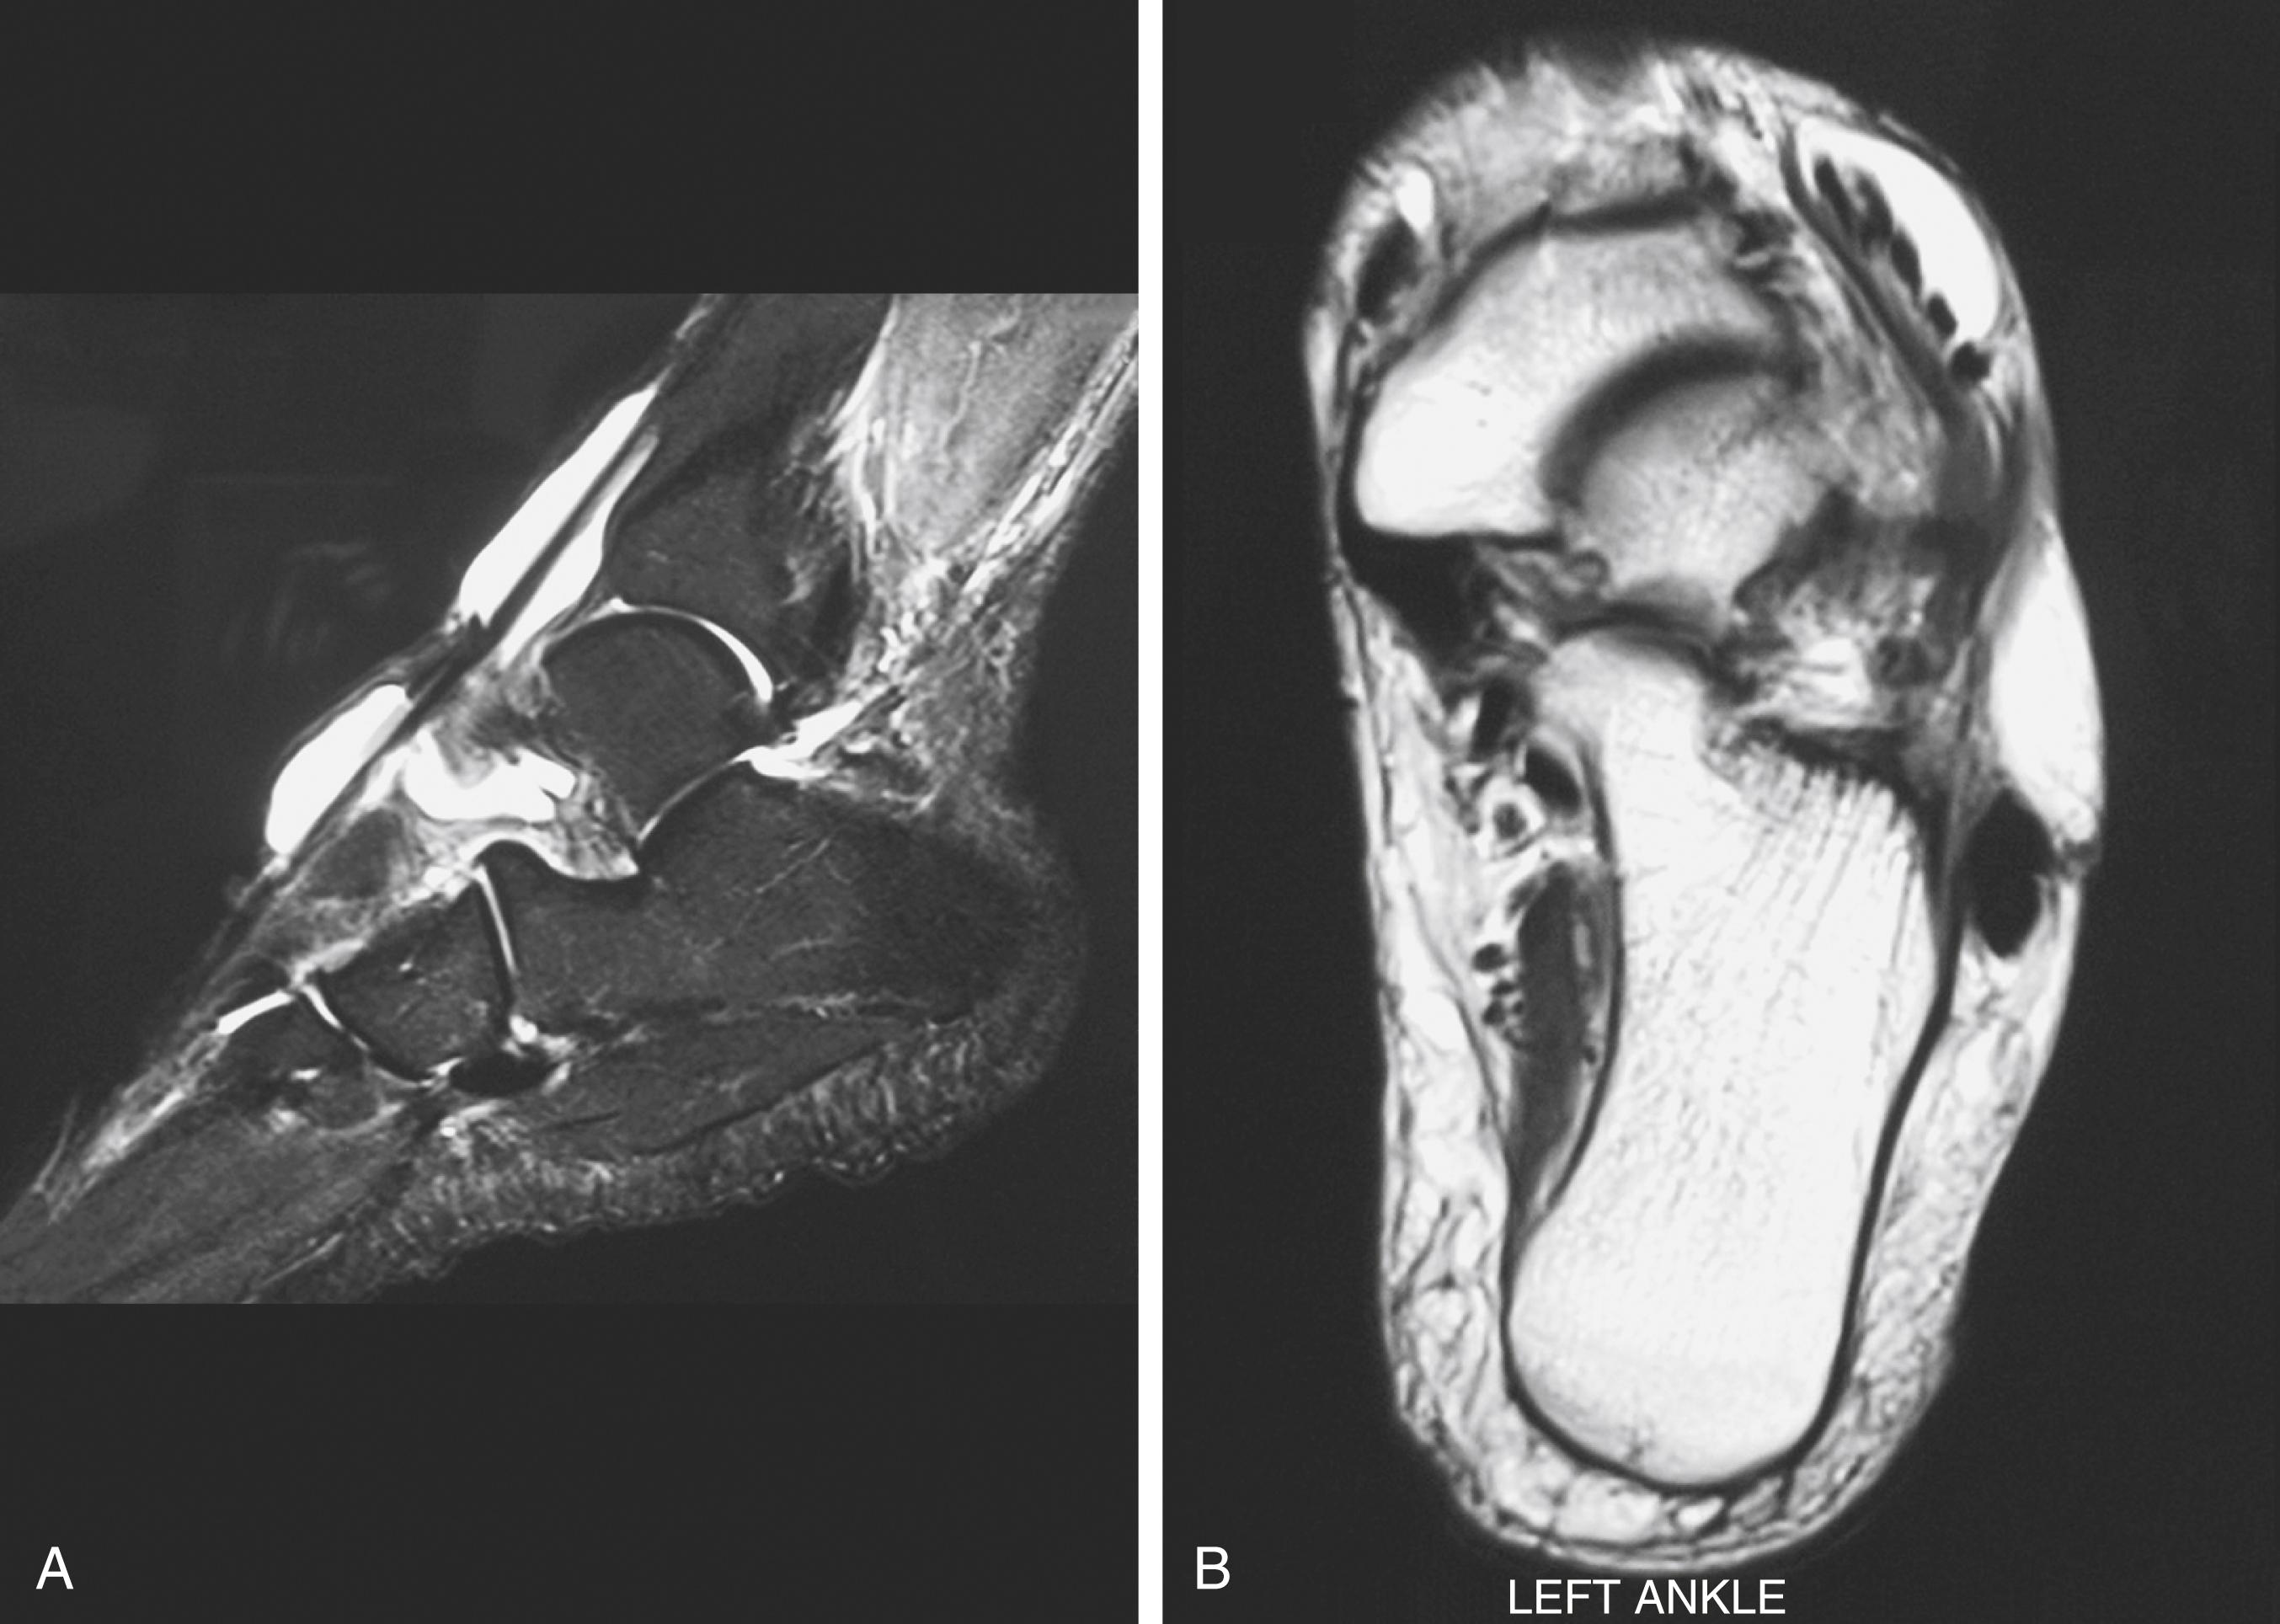 FIG. 191.3, Sagittal (A) and transverse (B) views of the magnetic resonance image of the ankle suggest tenosynovitis of the extensor digitorum longus tendon.